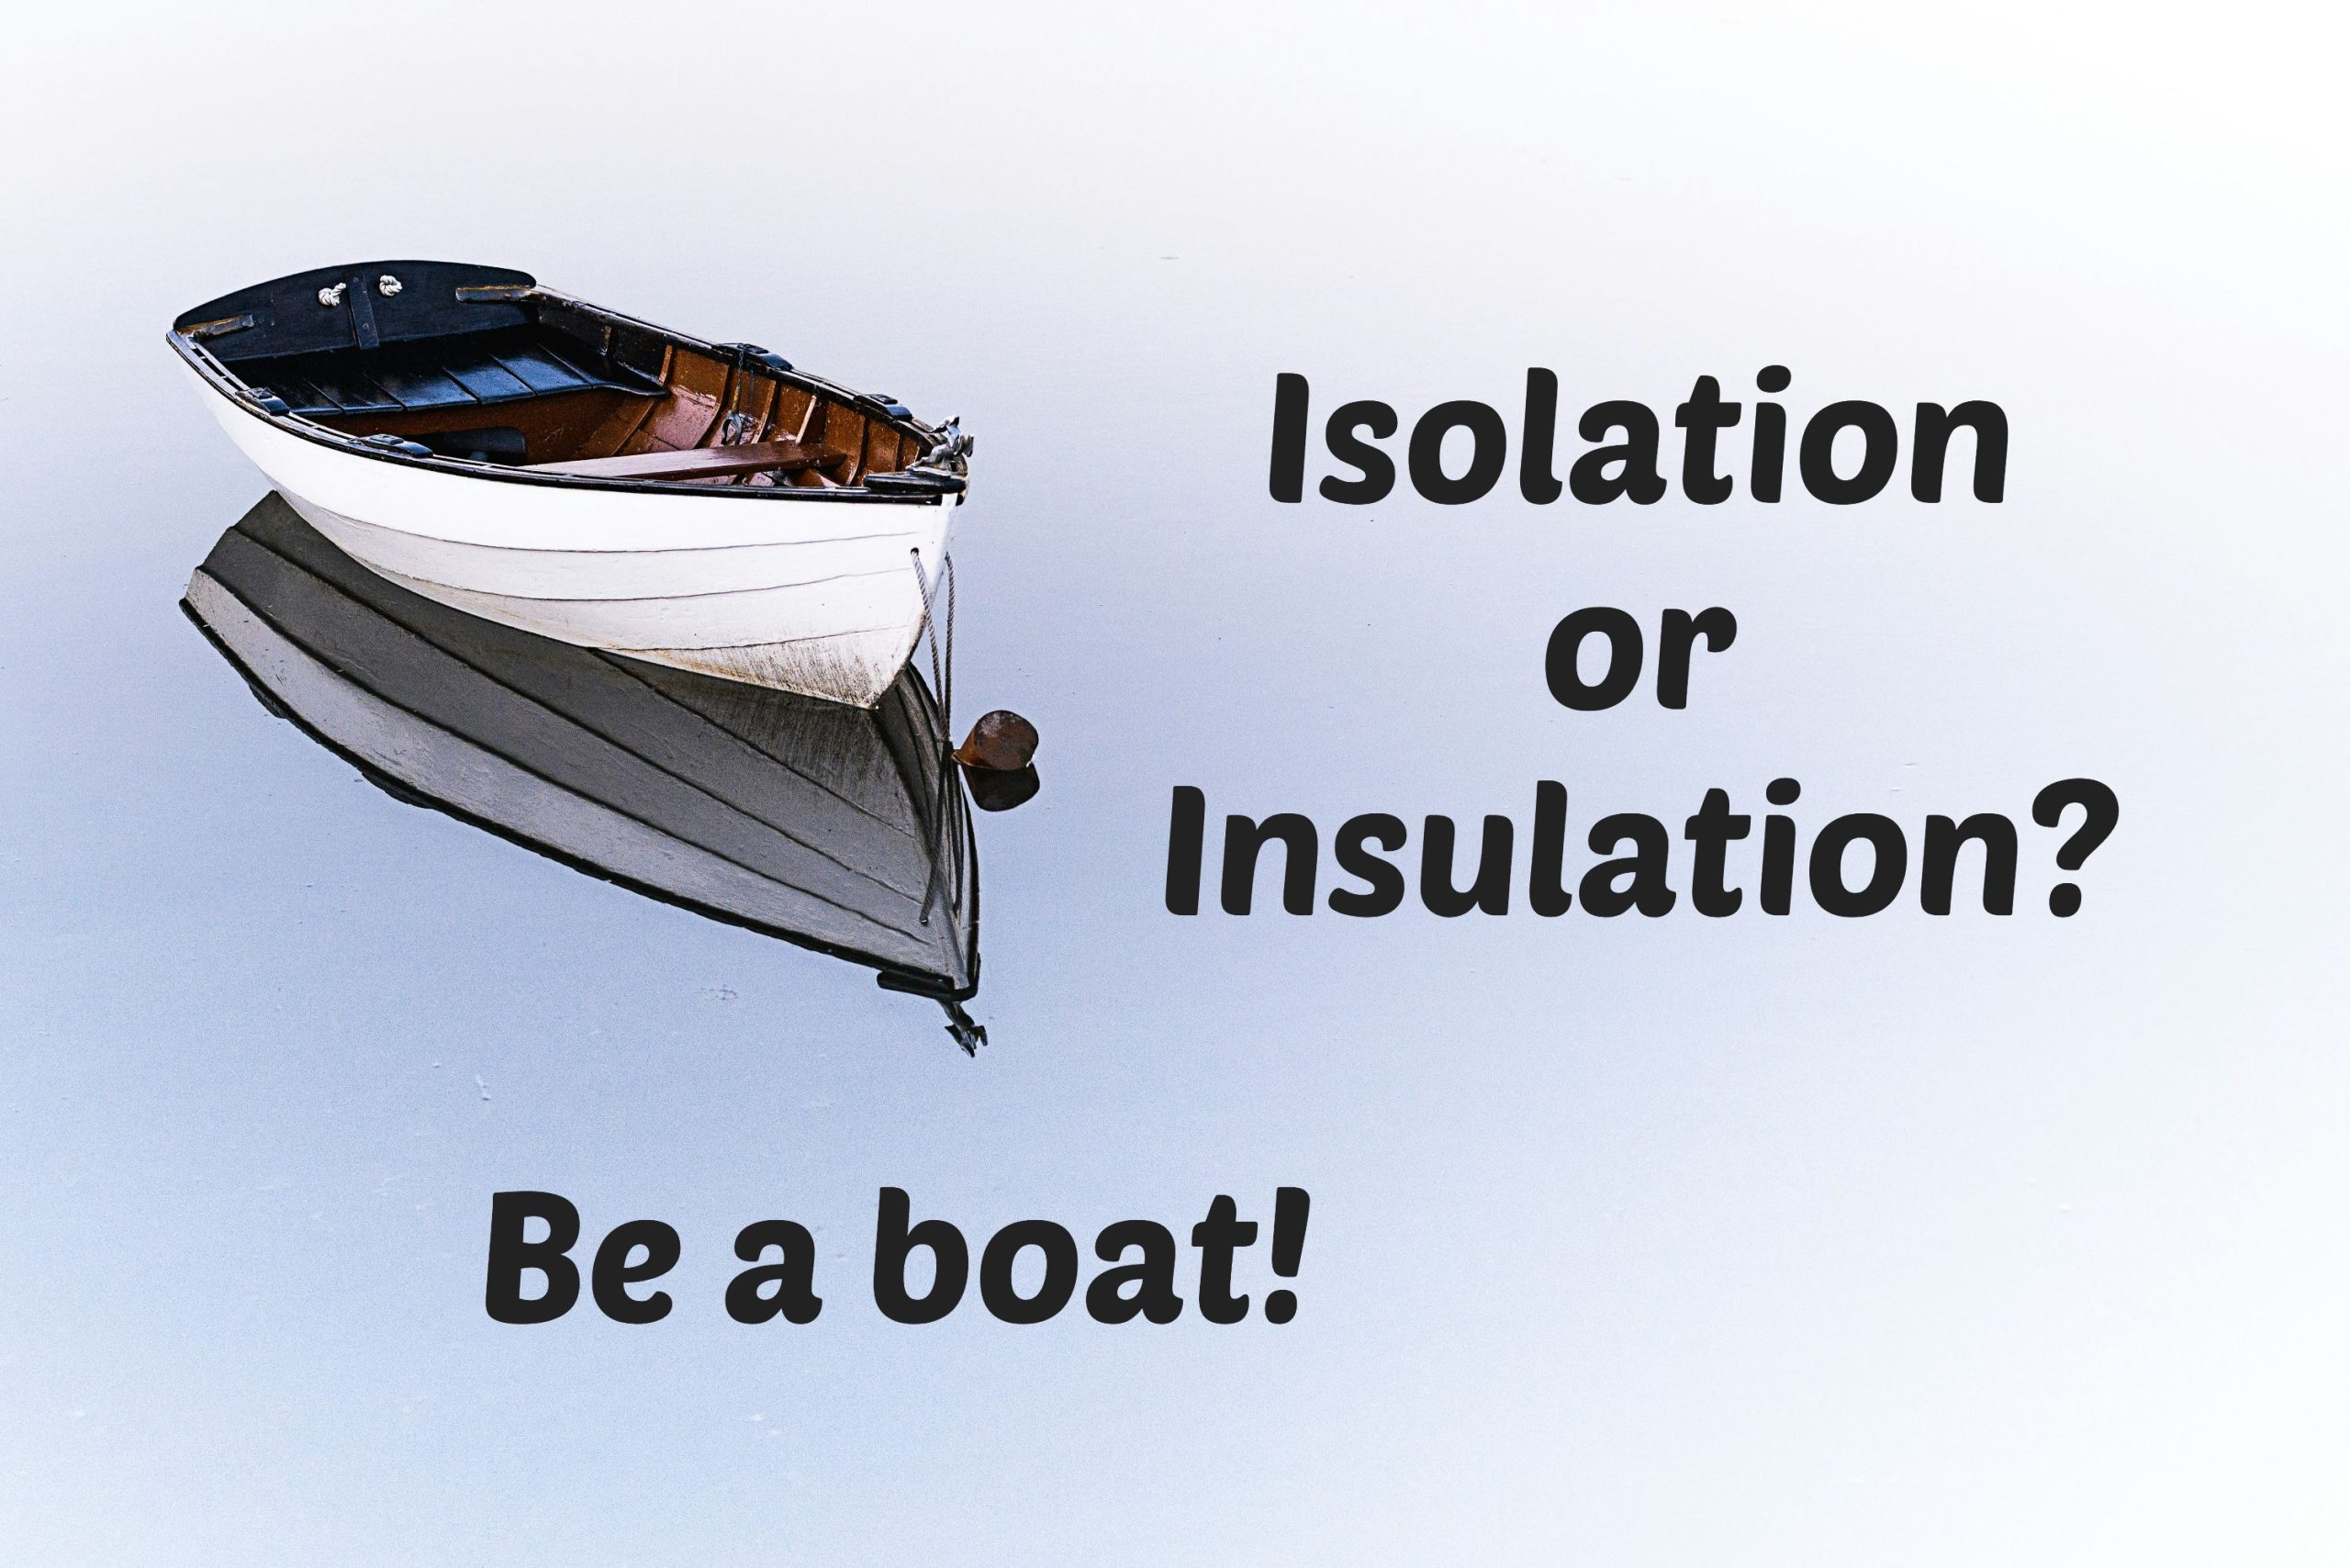 Isolation or Insulation - Boat